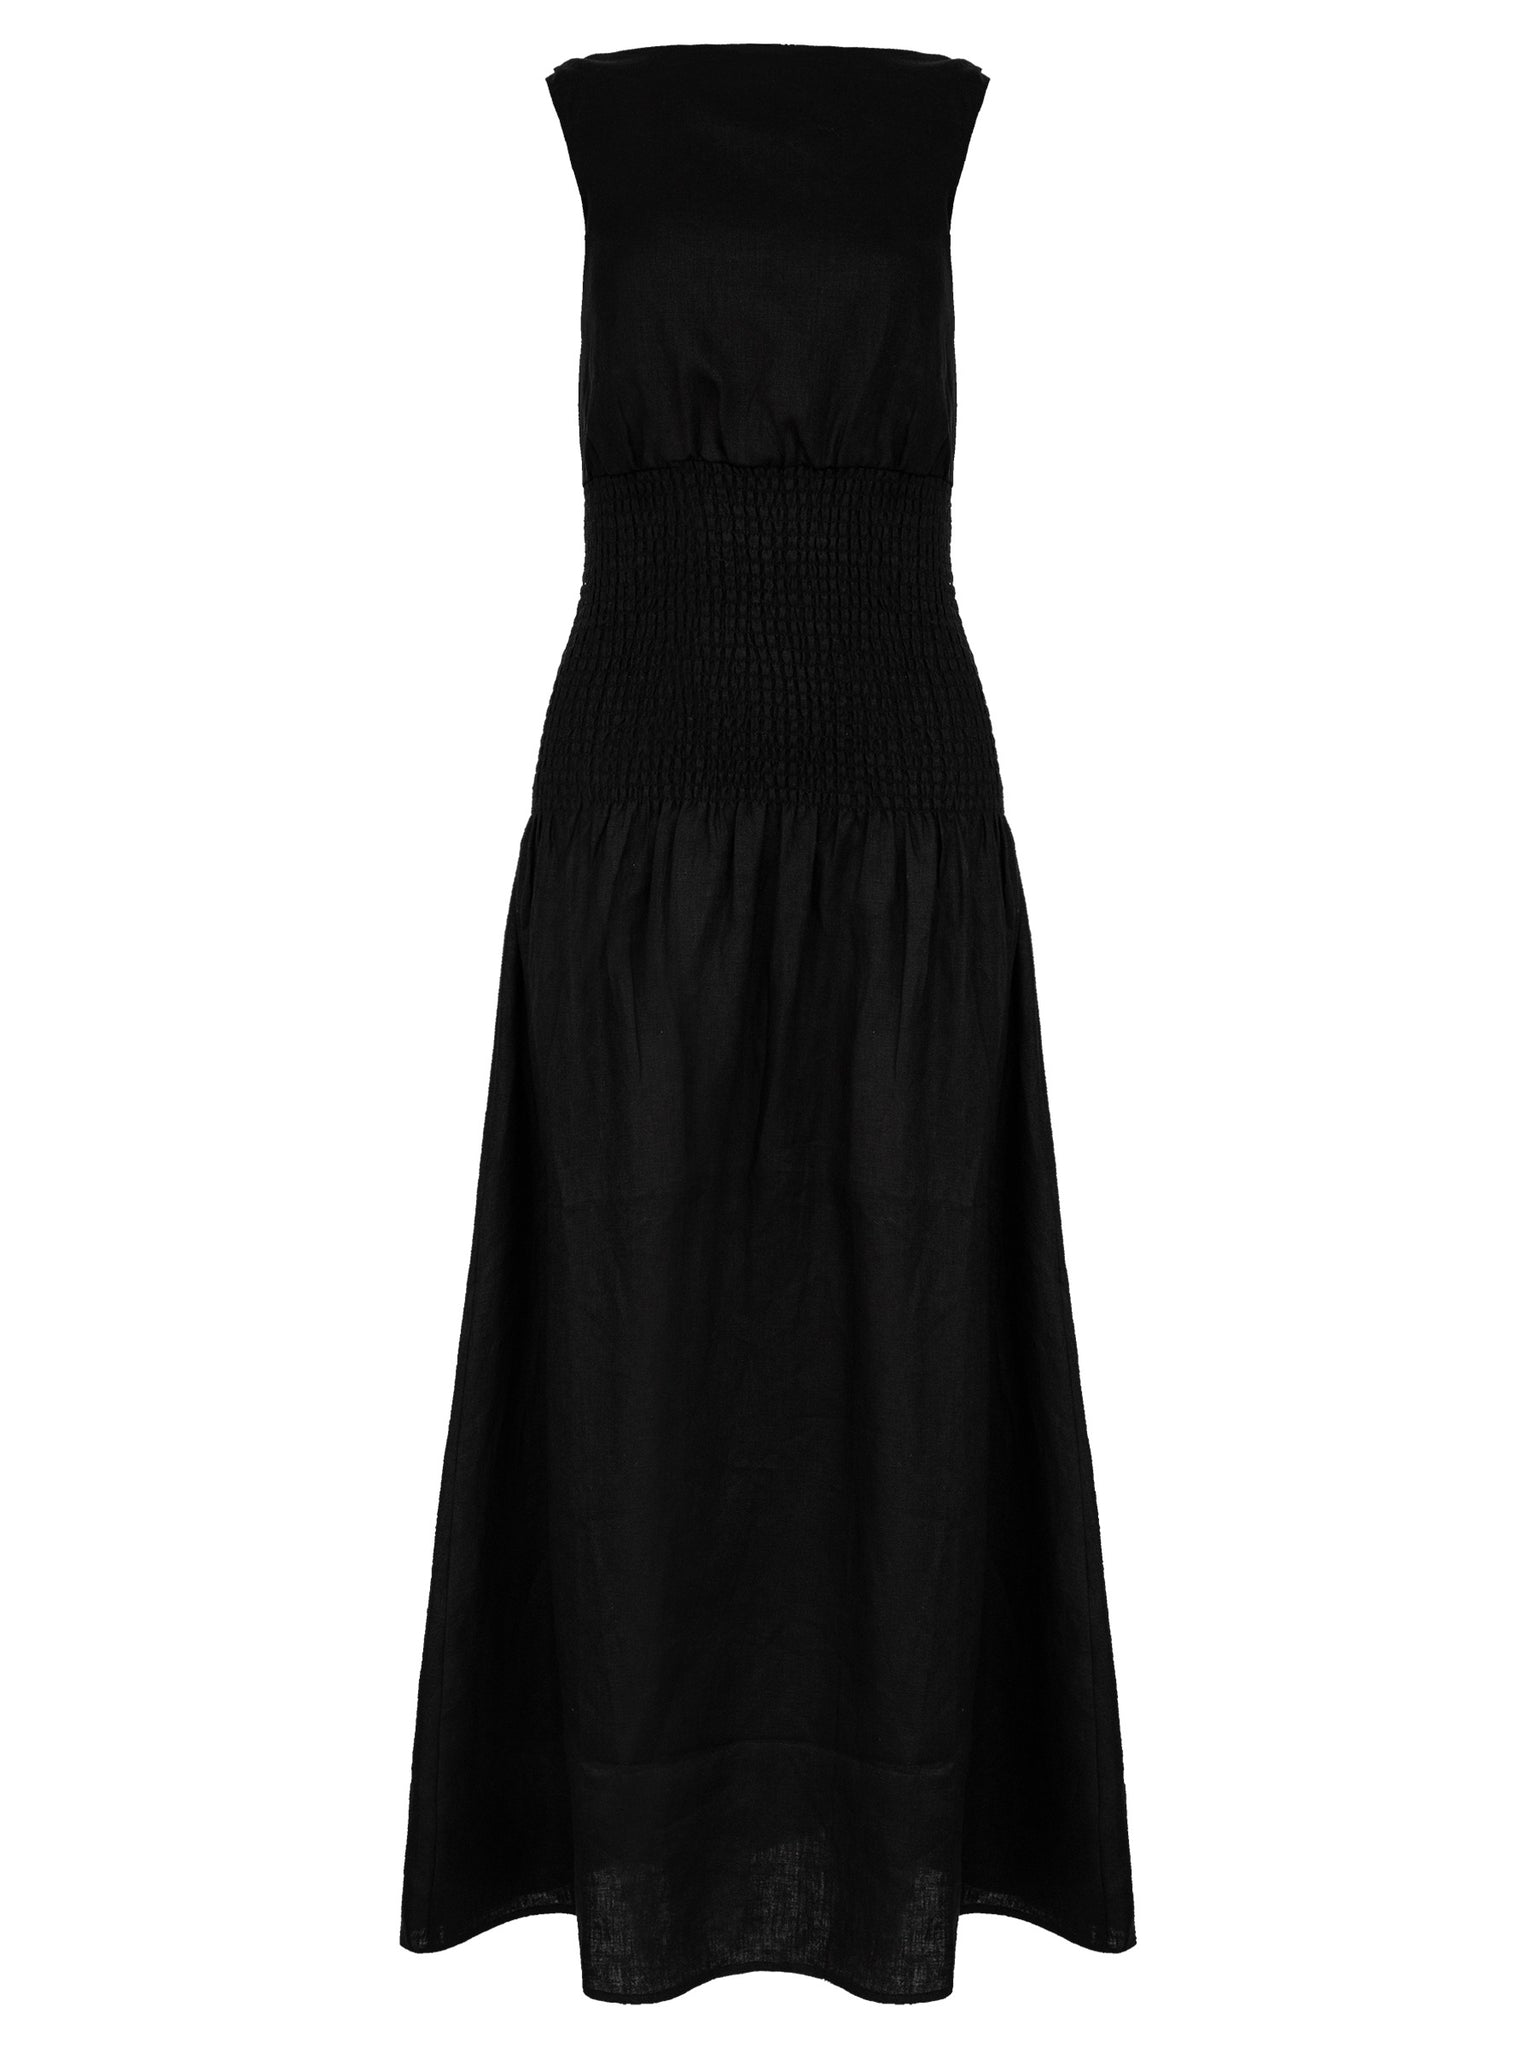 Sir The Label | Lorena Open Back Maxi Dress in Black | The UNDONE by SIR.